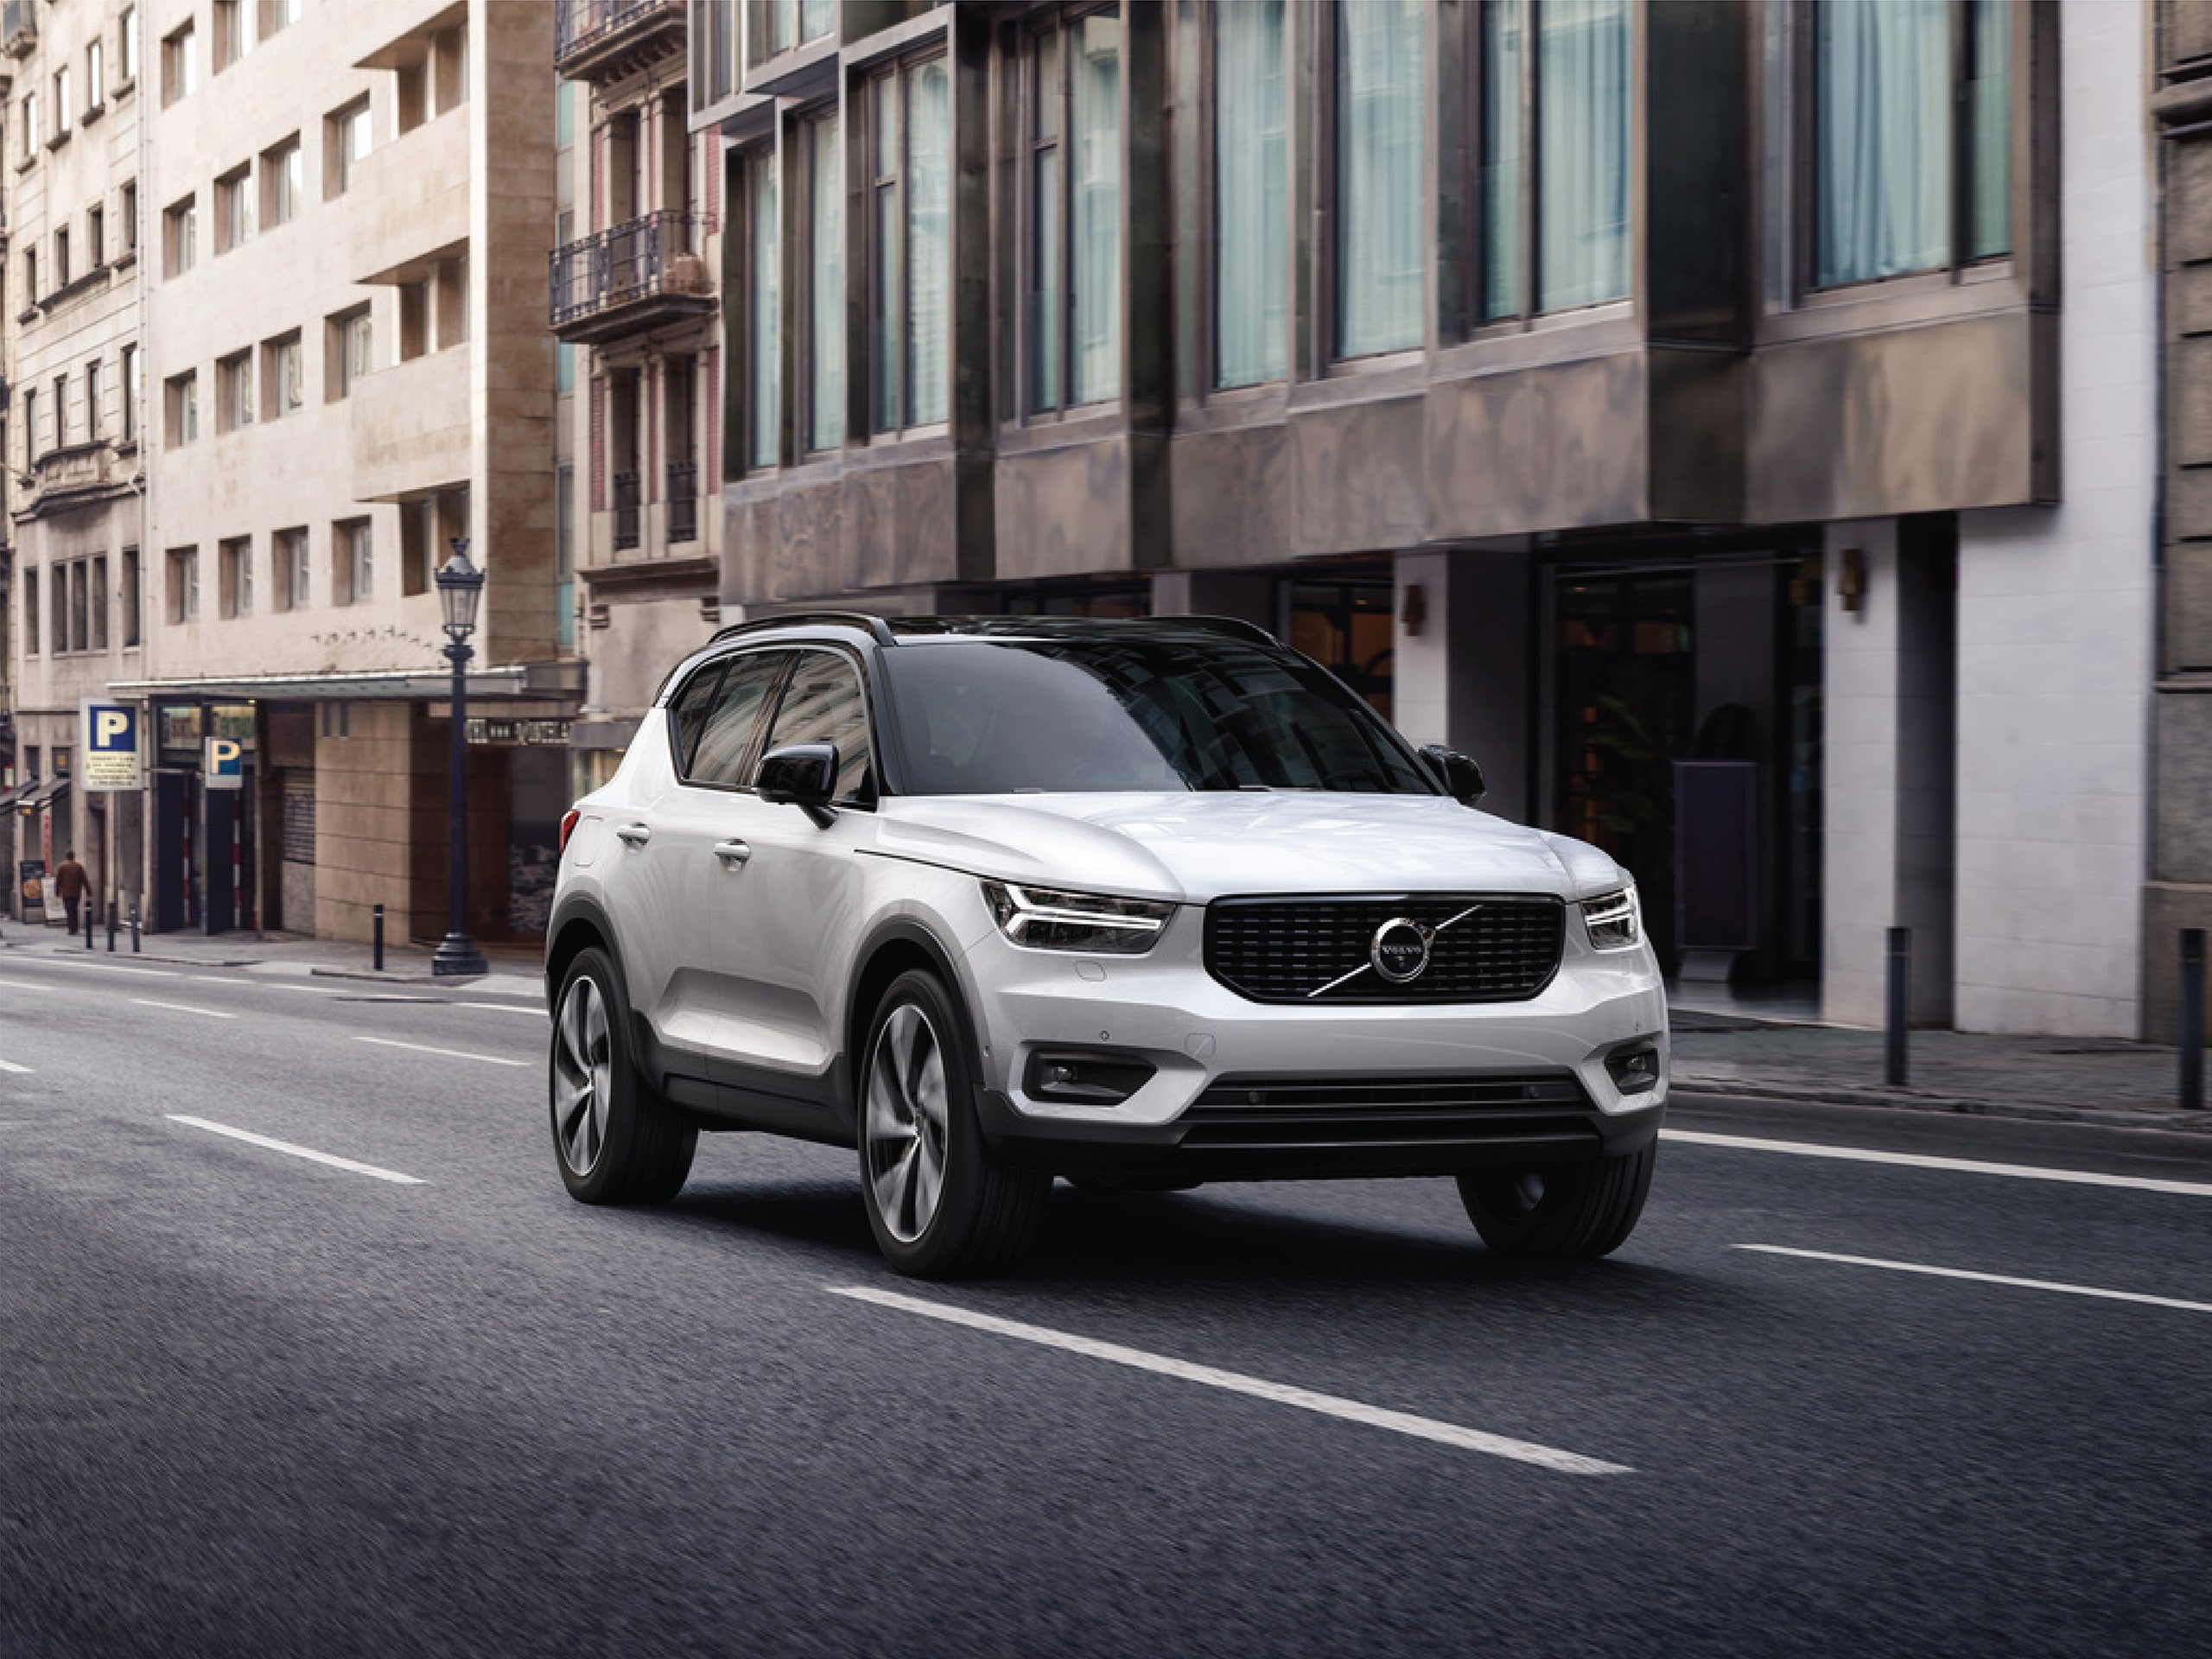 THE SUV BUILT FOR URBAN LIFE. The Volvo XC40.